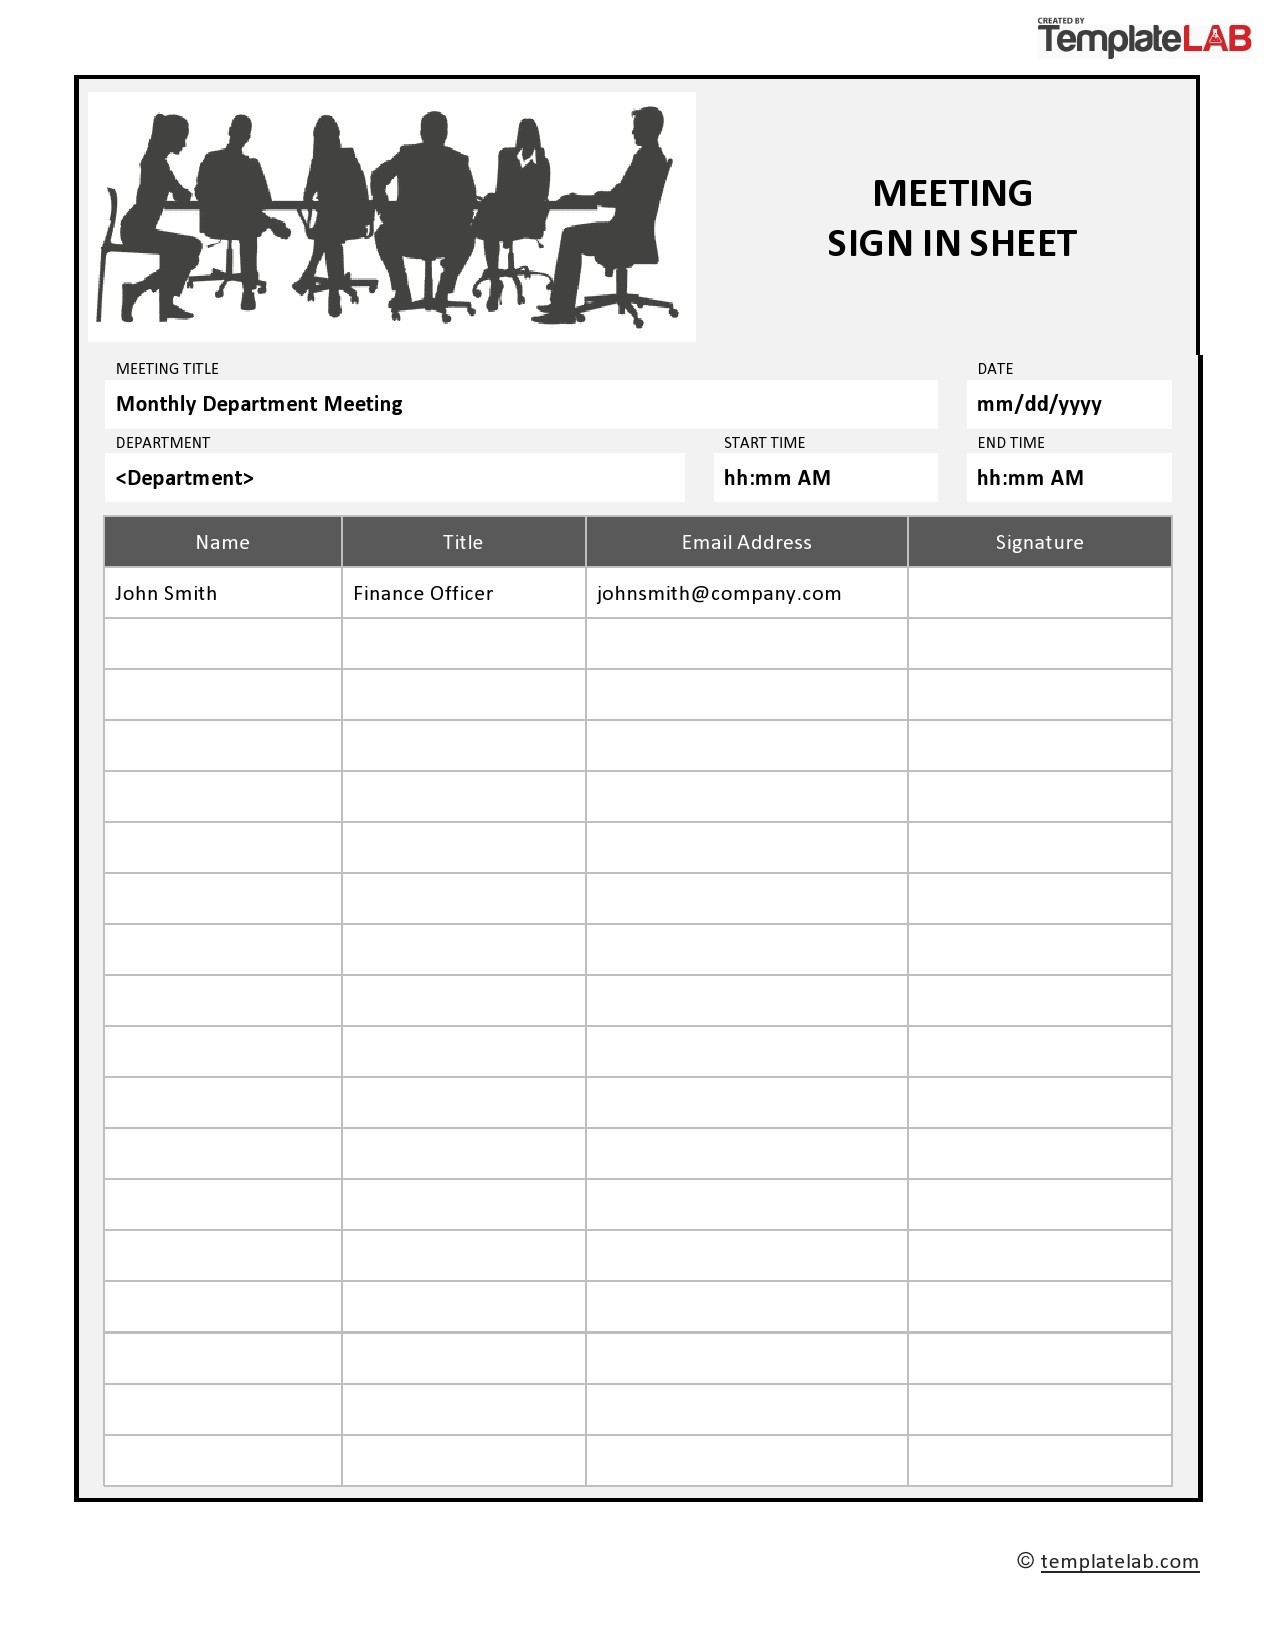 Free Meeting Sign In Sheet Template Word